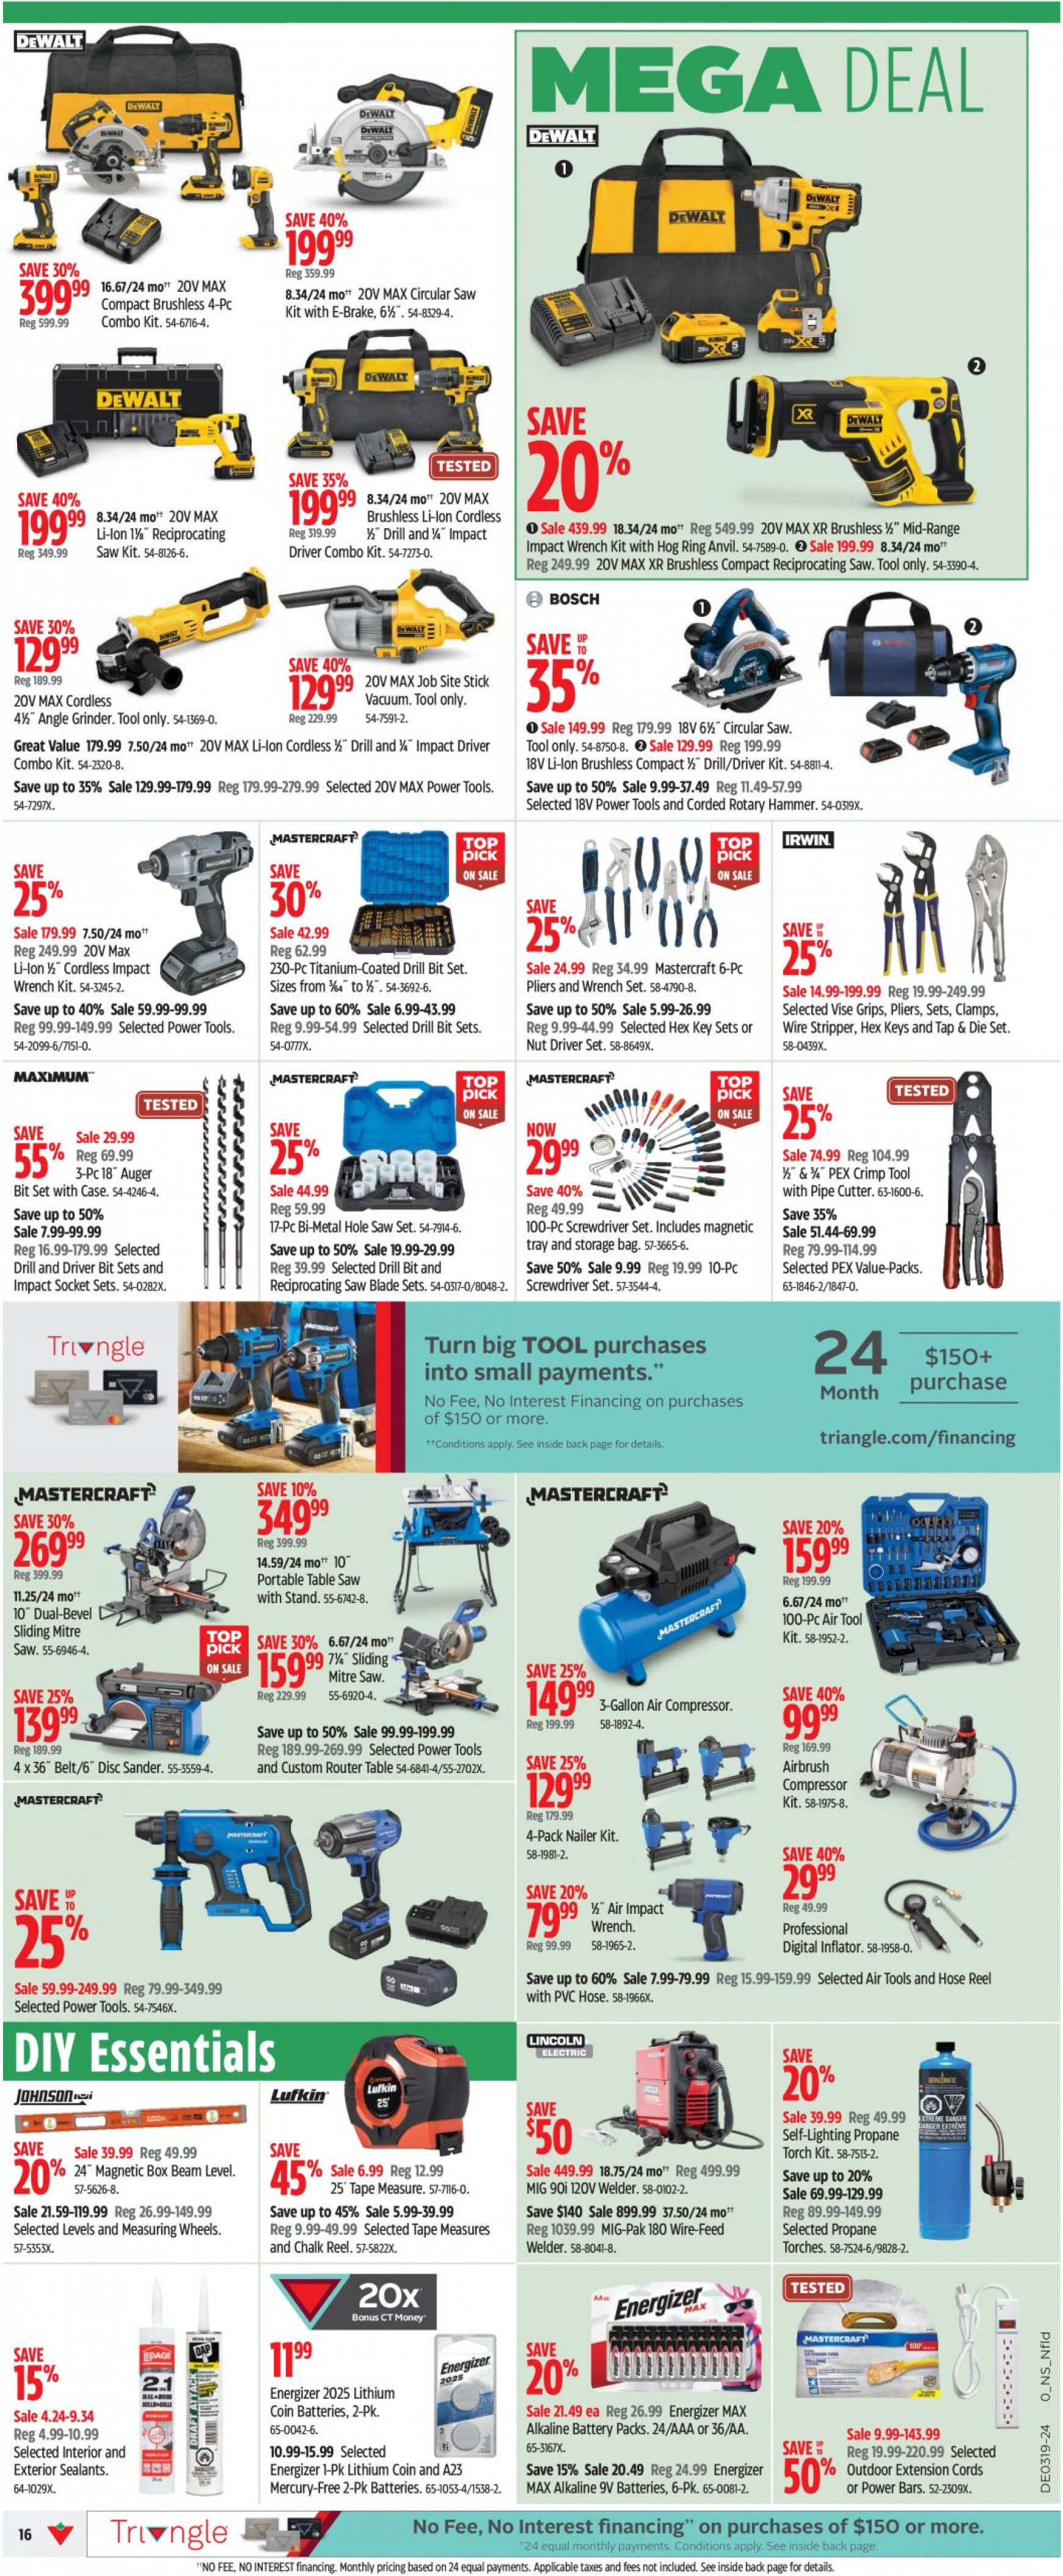 canadian-tire - Canadian Tire flyer current 02.05. - 08.05. - page: 15